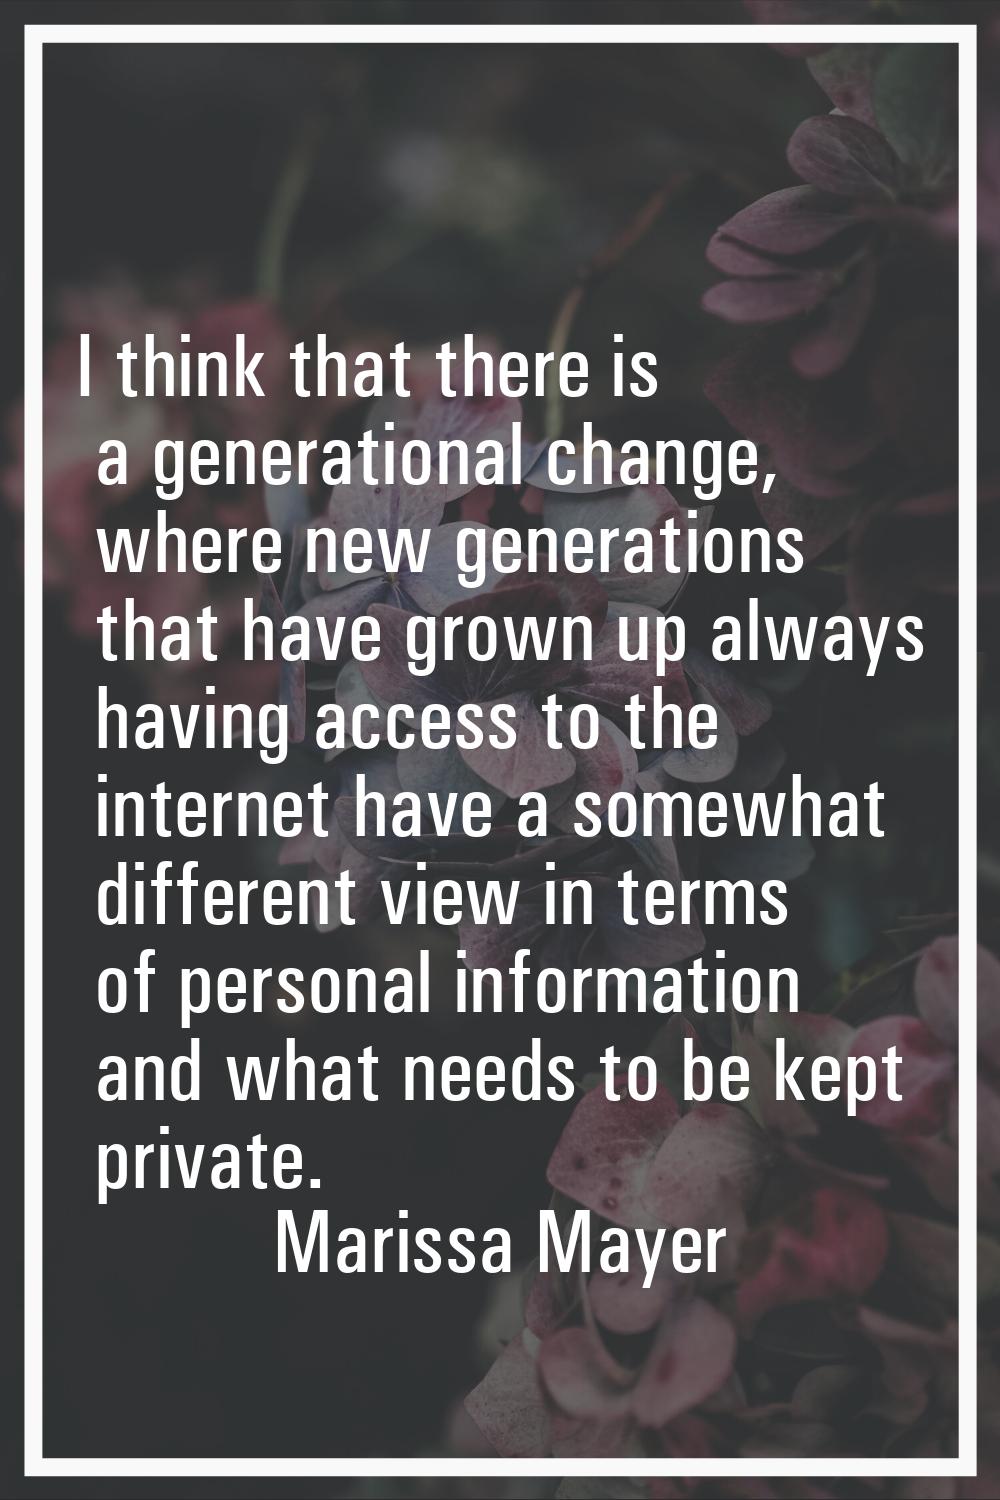 I think that there is a generational change, where new generations that have grown up always having